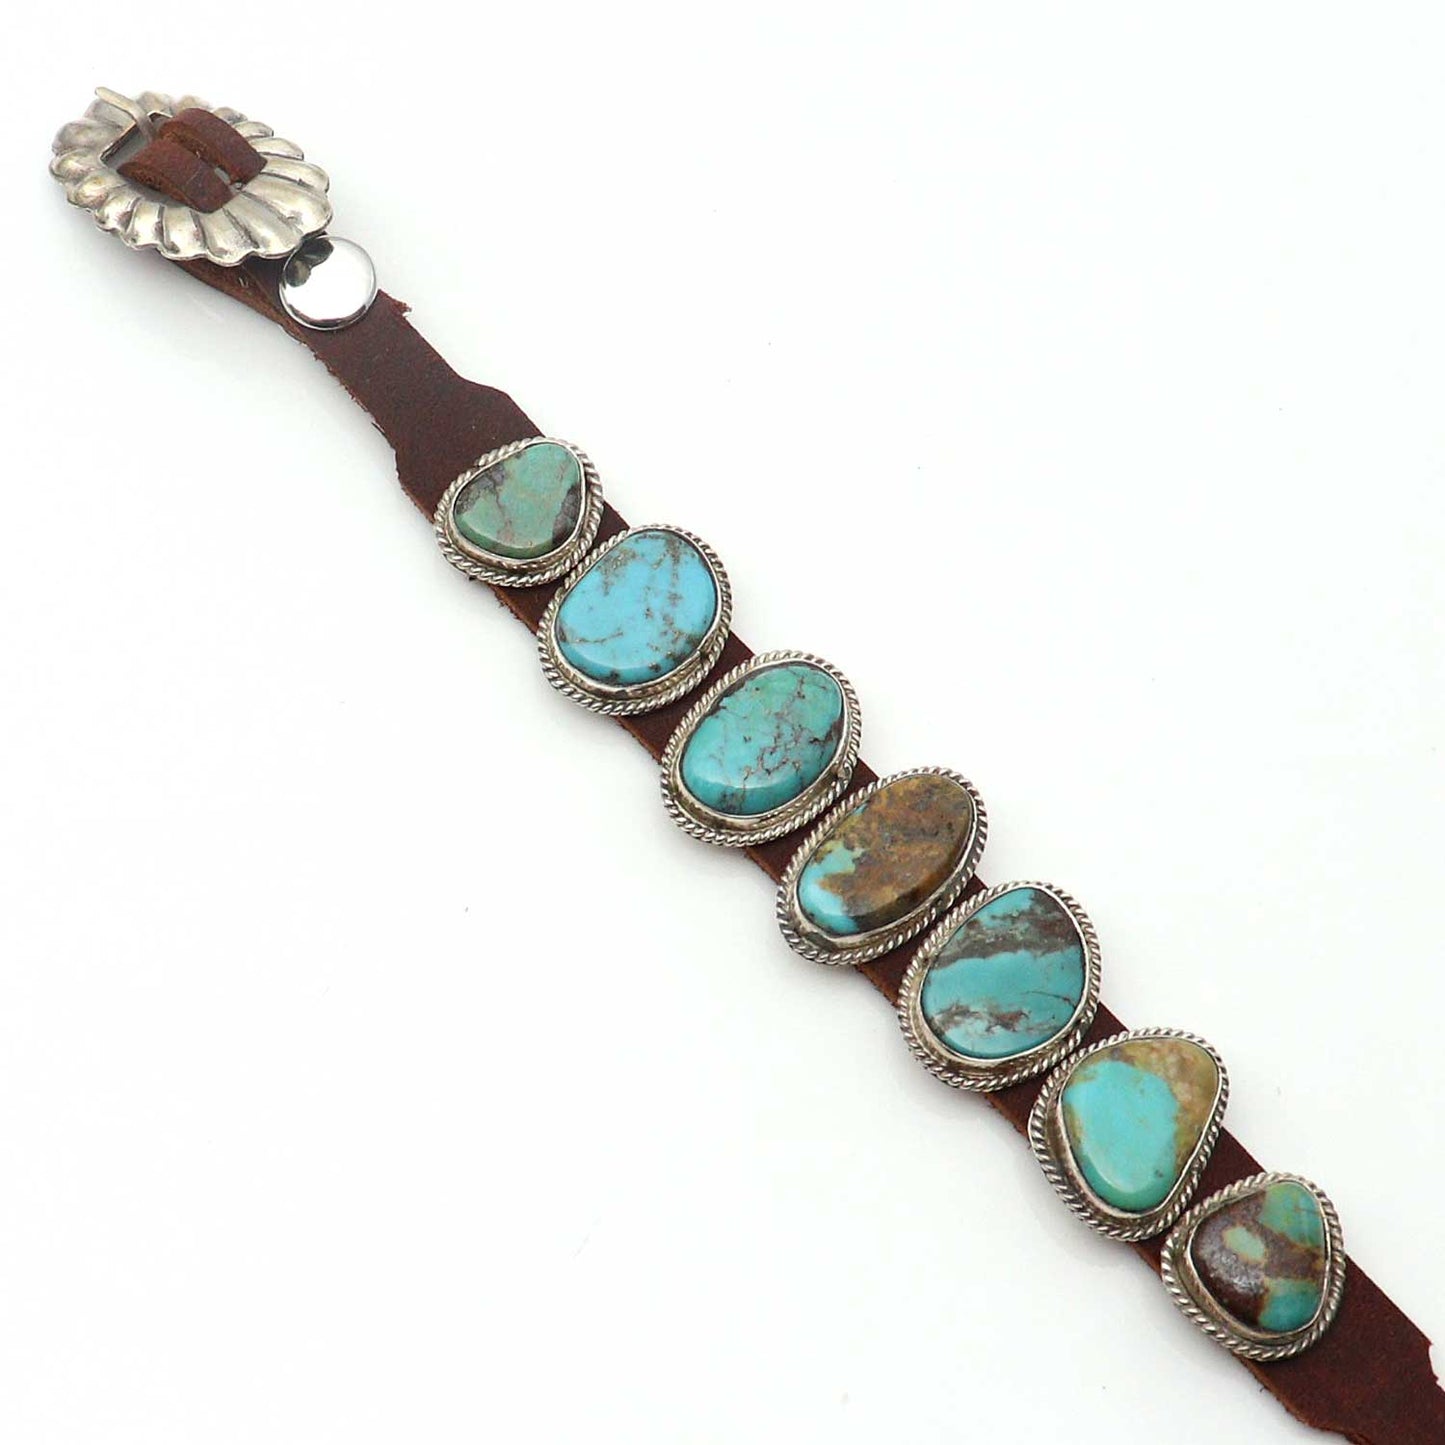 Turquoise & Leather Concho Bracelet by Rogers